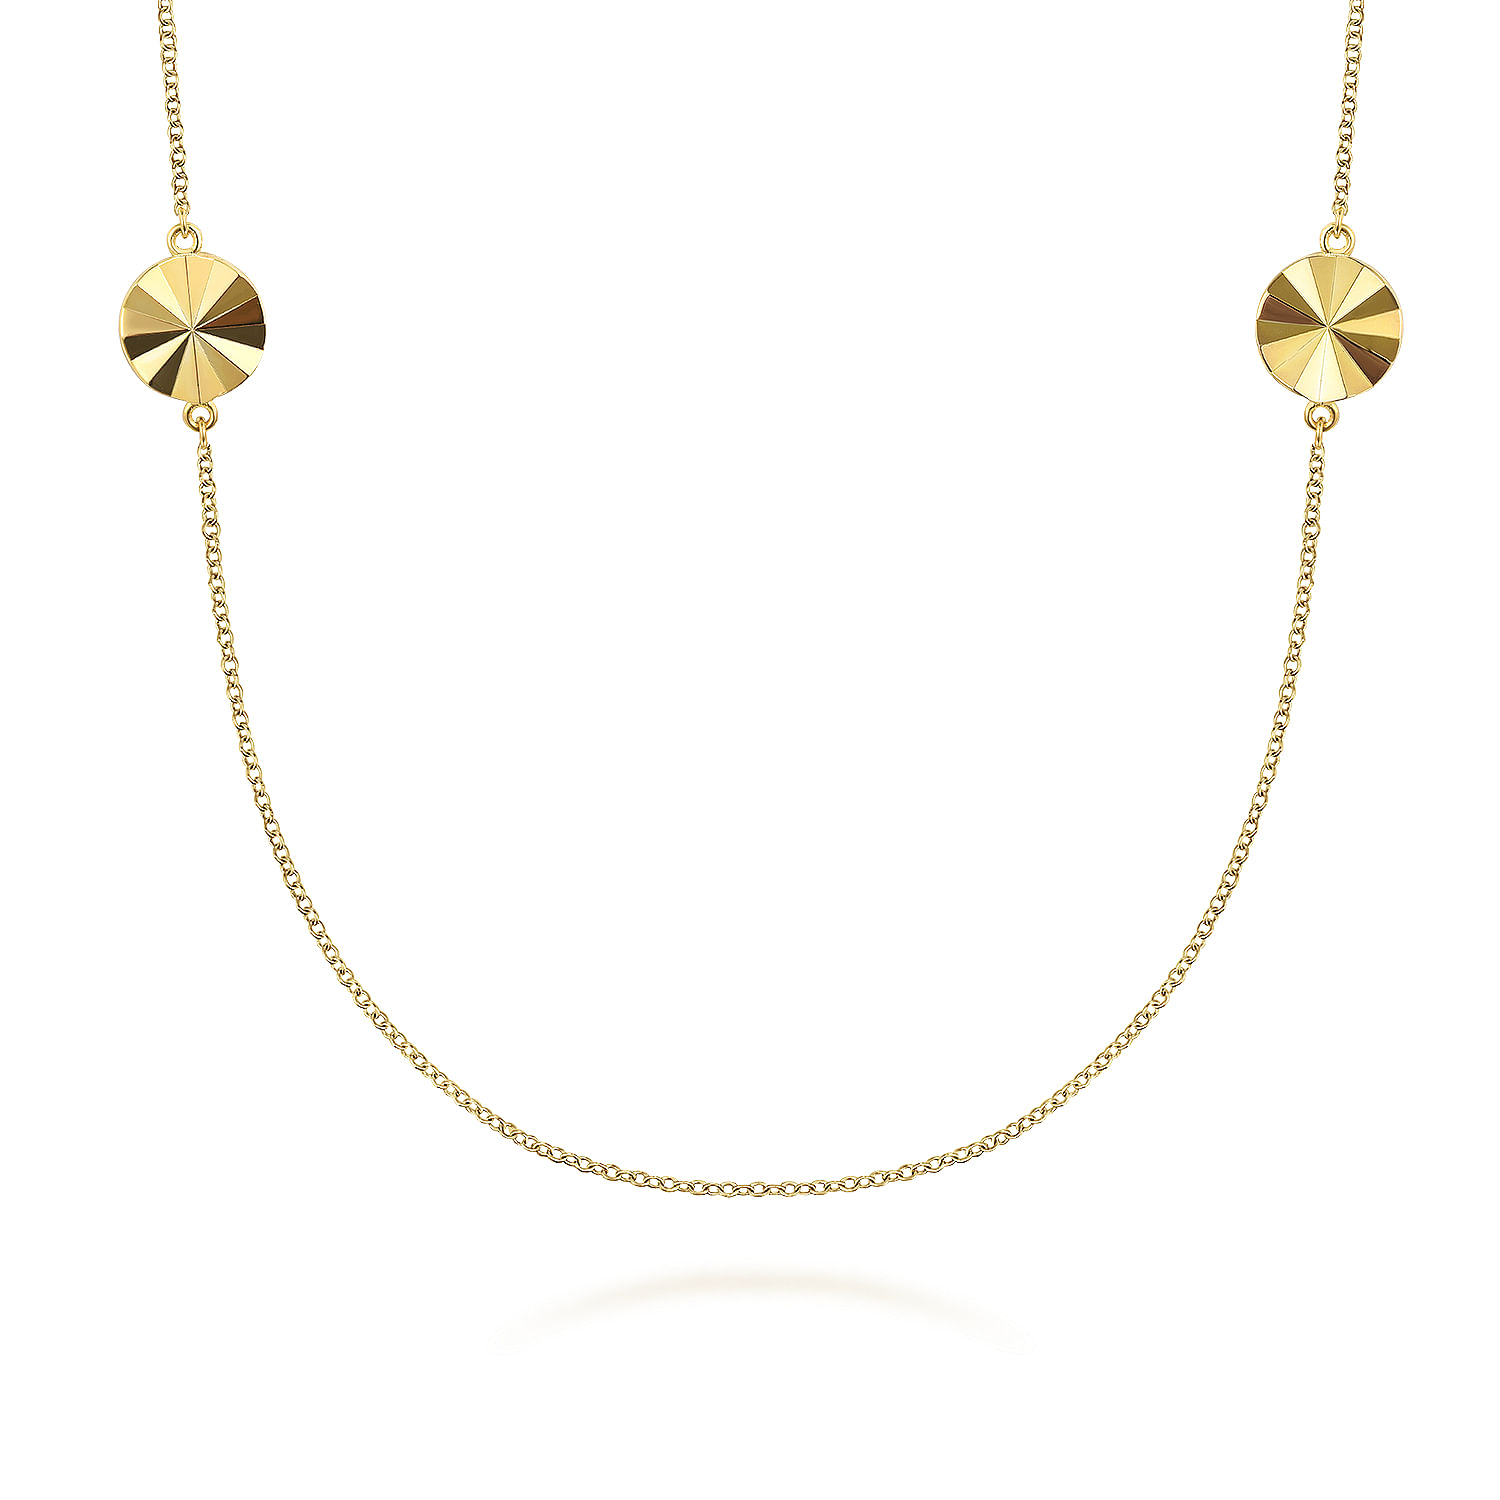 Gabriel - 14K Yellow Gold Hollow Tube Link Necklace 